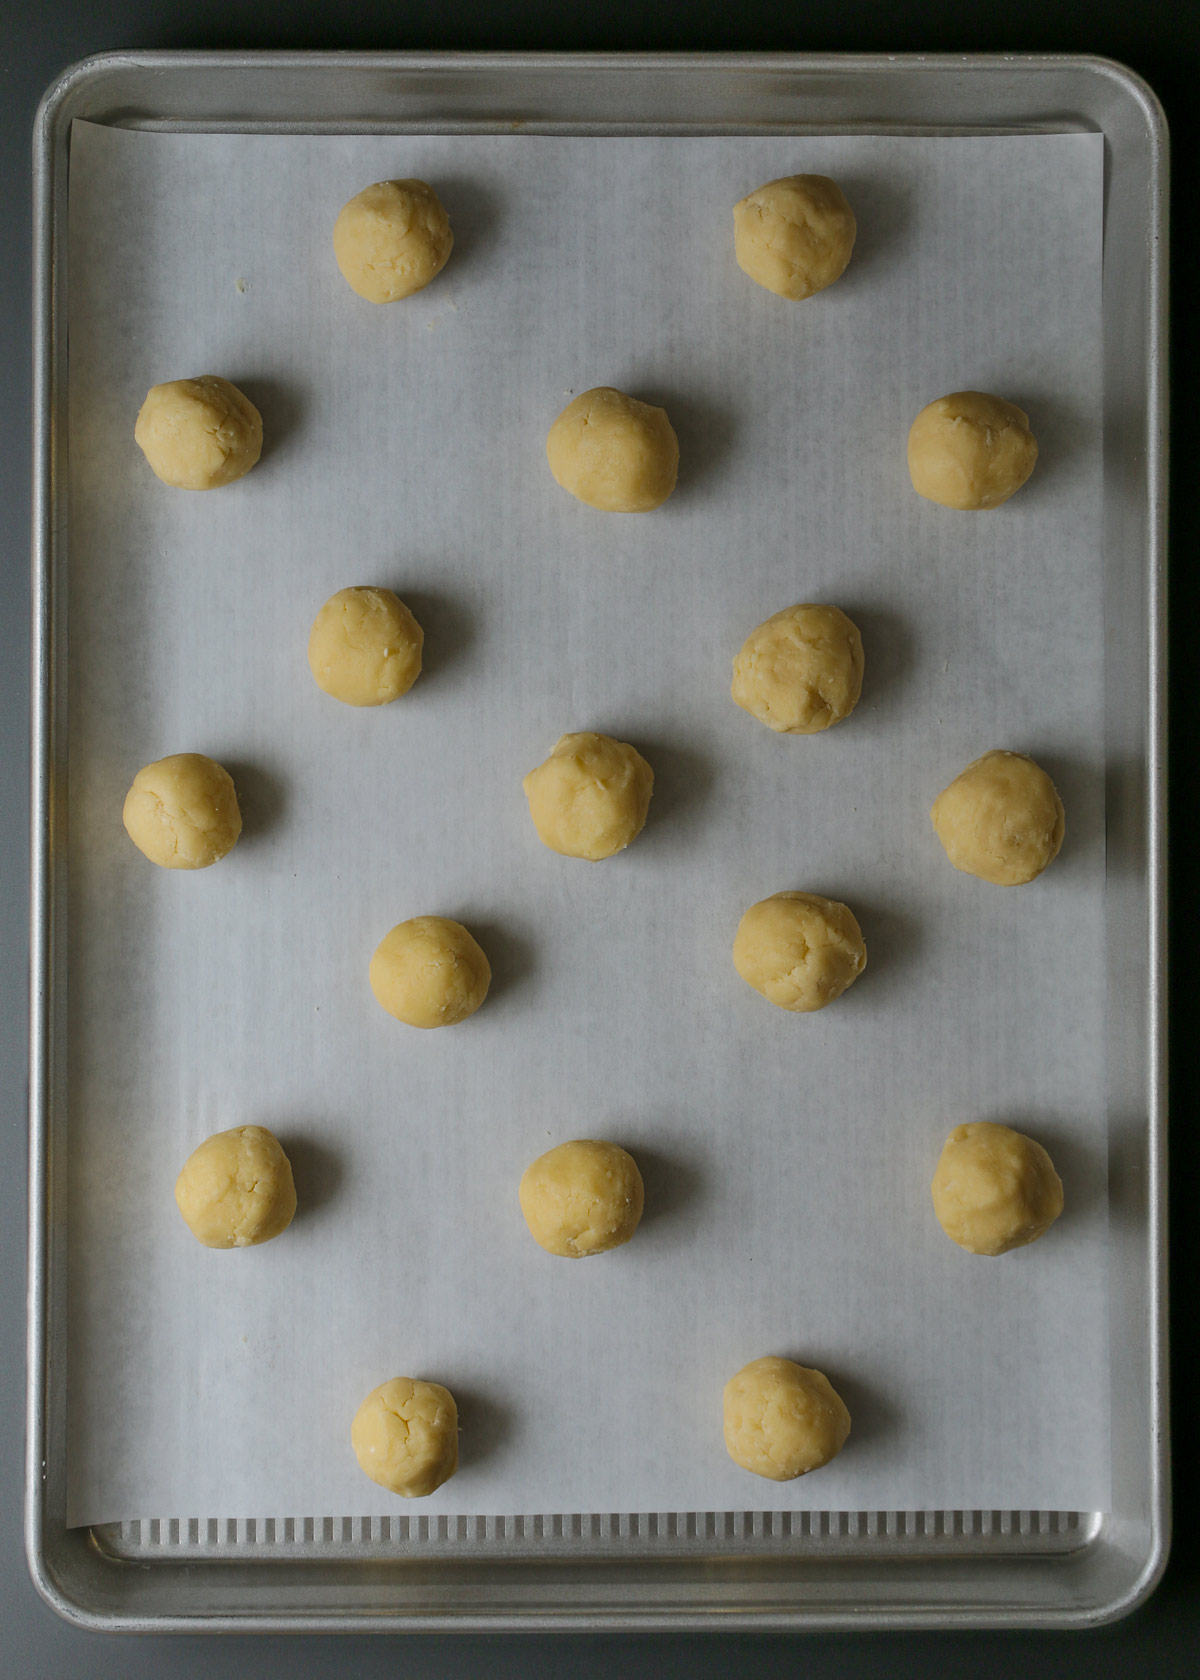 dough balls on parchment-lined tray.